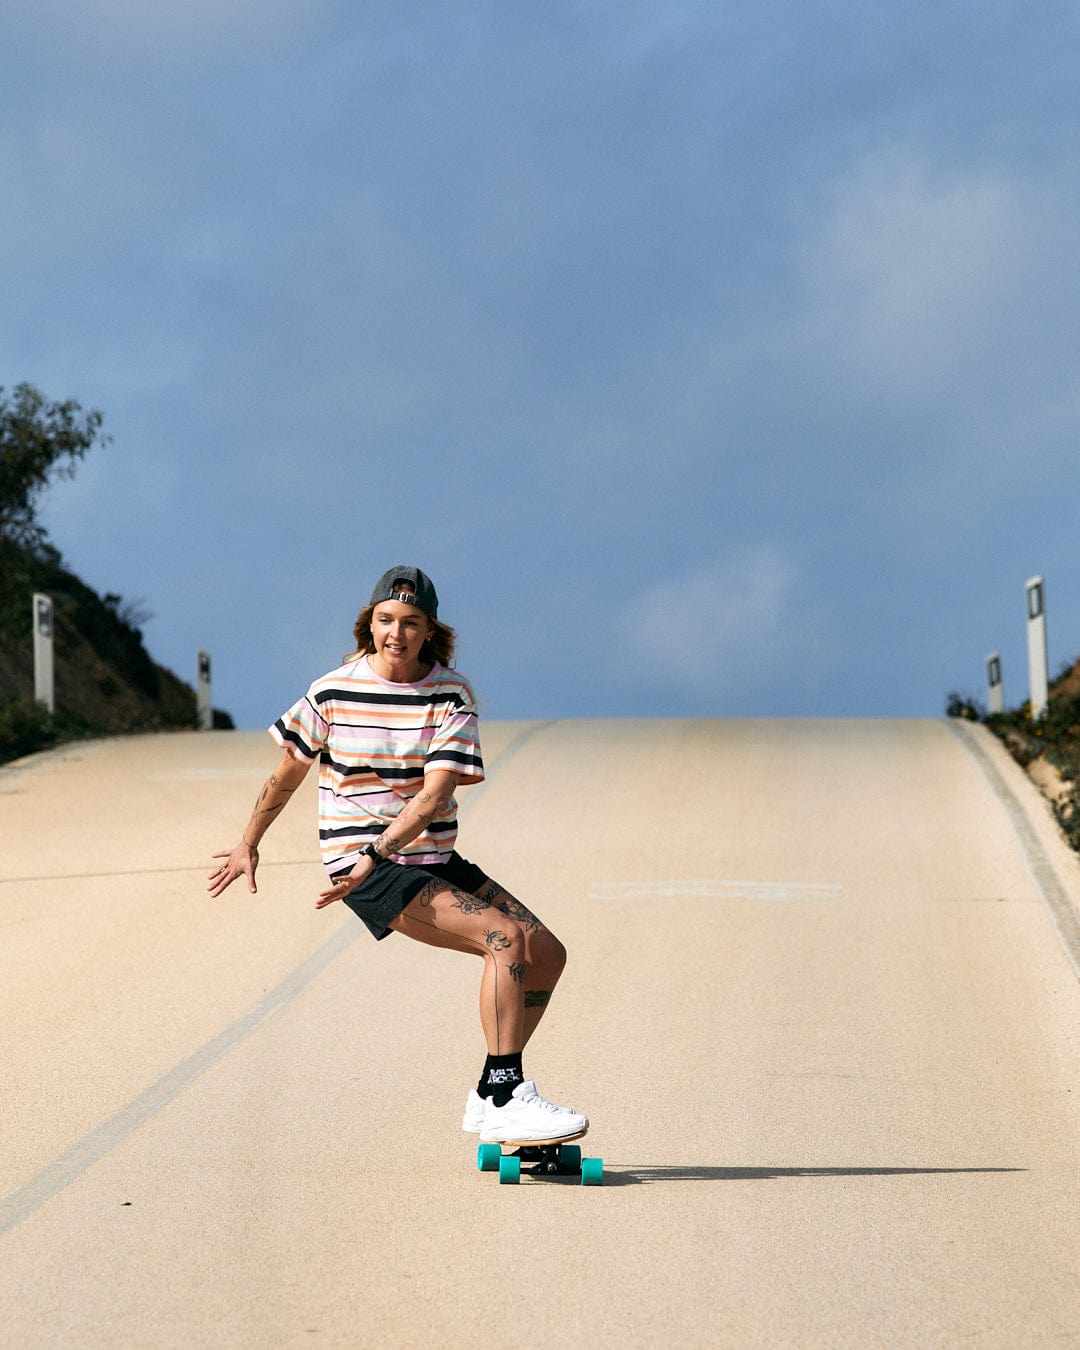 A skateboarder cruising downhill on an open road, his Juno - Womens Short Sleeve T-Shirt - Multi fluttering with a stripe pattern from Saltrock.